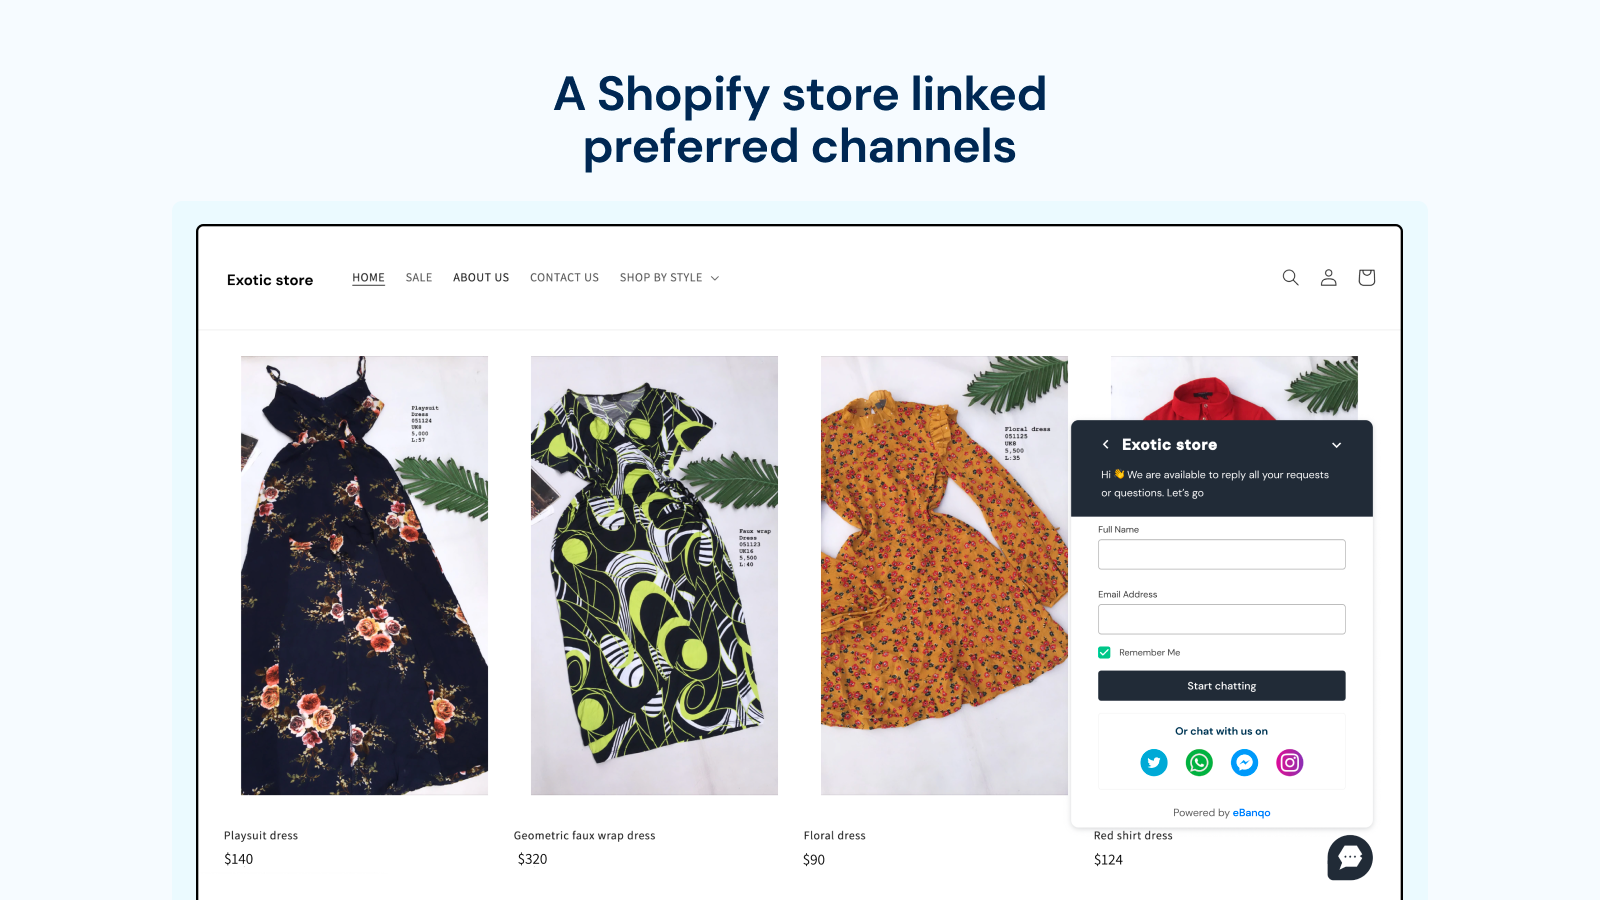 A Shopify store linked preferred channels